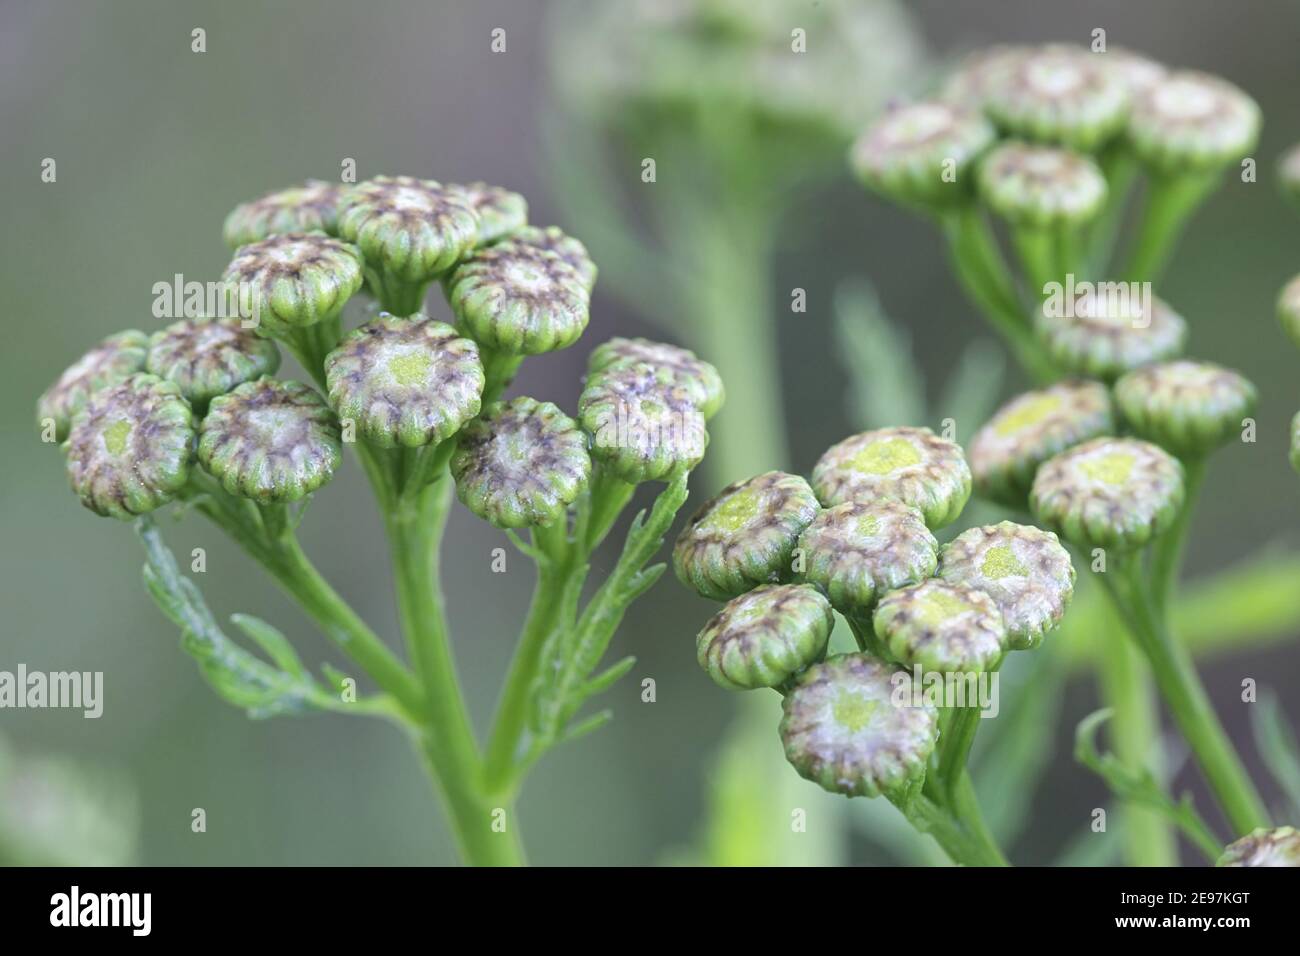 Tanacetum vulgare, also called Chrysanthemum vulgare, known as common tansy, wild flower from Finland Stock Photo